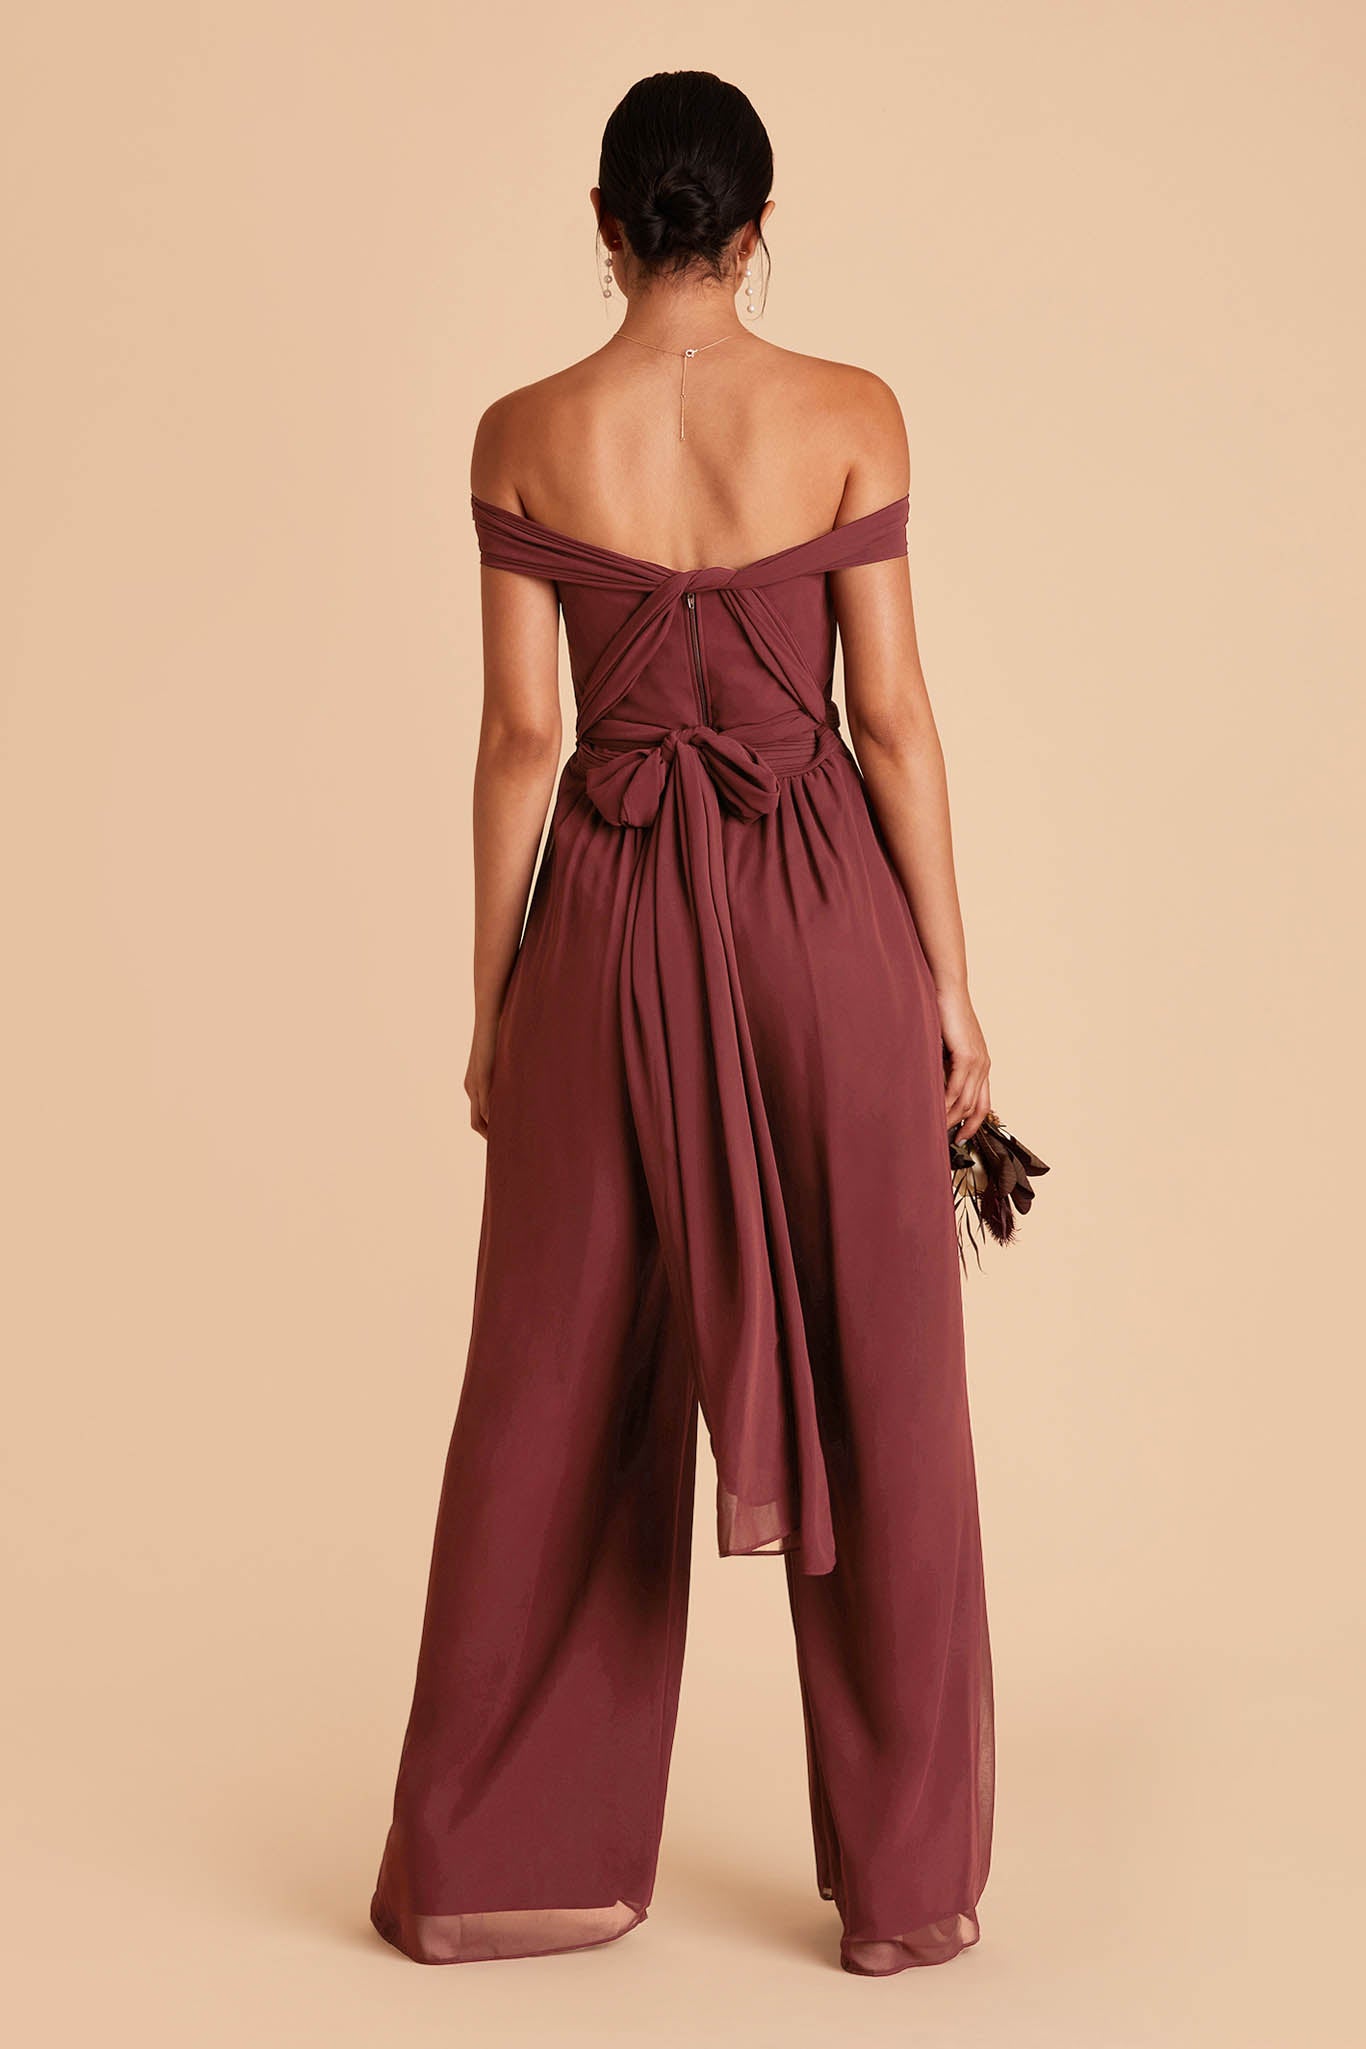 Red wedding jumpsuit with convertible neckline and tie in the back